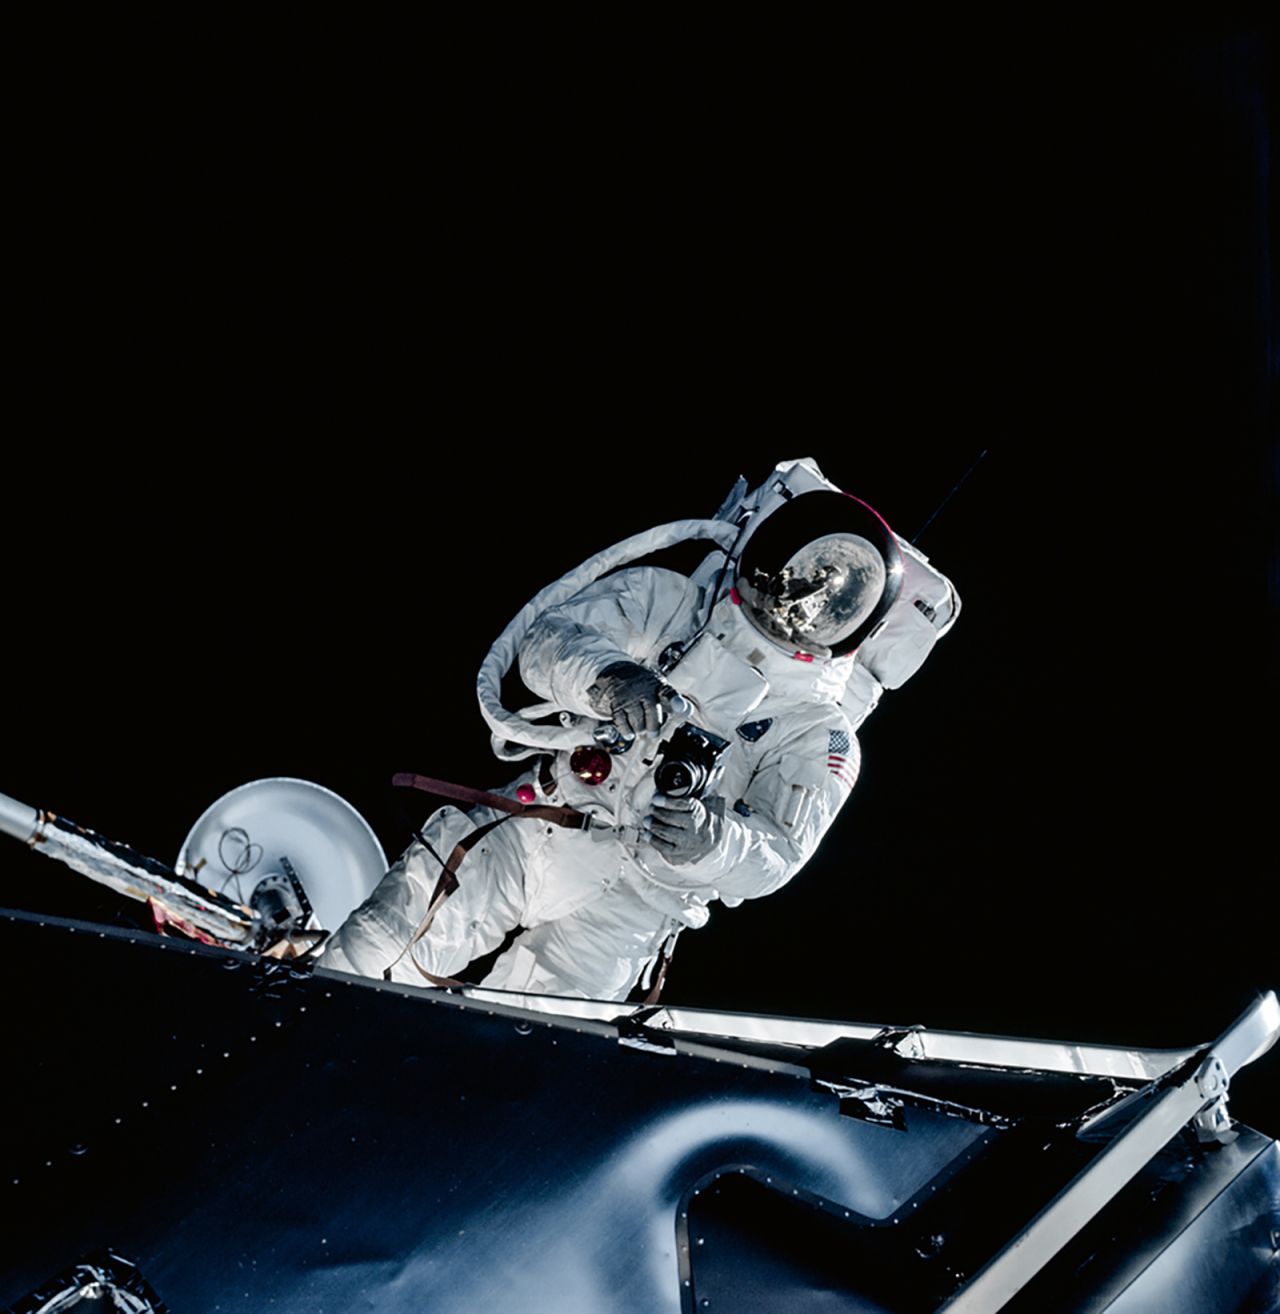 Image shows Lunar Module Pilot Russell Schweickart taking a photograph during his Extravehicular Activity (EVA) testing the new spacesuit during the Apollo 9 mission.